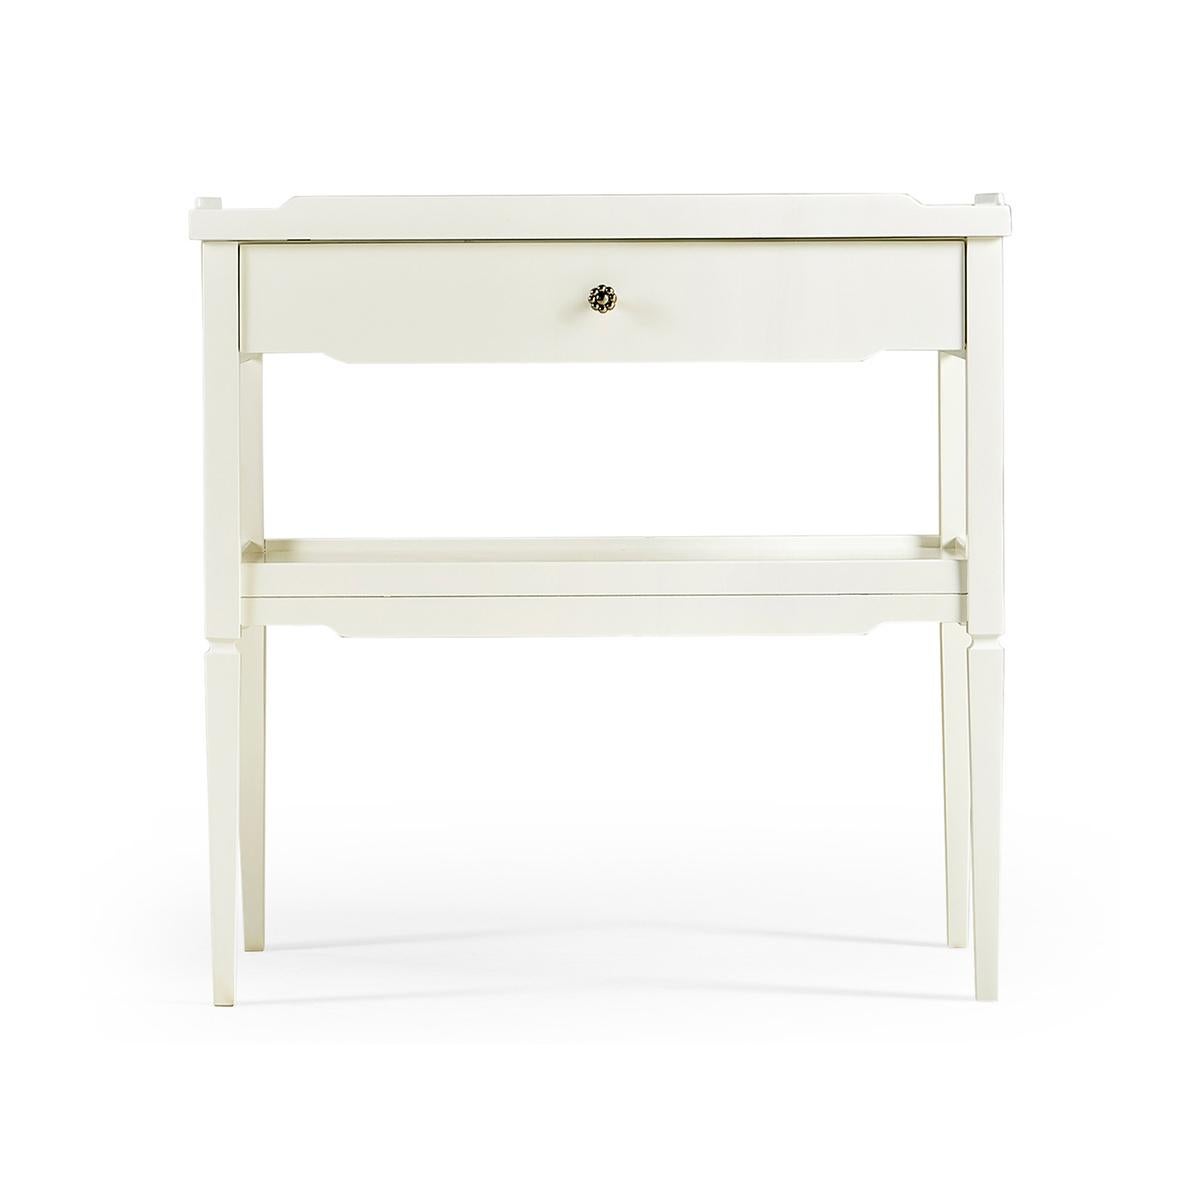 Modern Painted side table with an off white lacquered finish, with a lipped top that doubles as a pull out tray, single drawer lined with a zany blue and white print, power supply access and cord management and a lower shelf for oversized items.